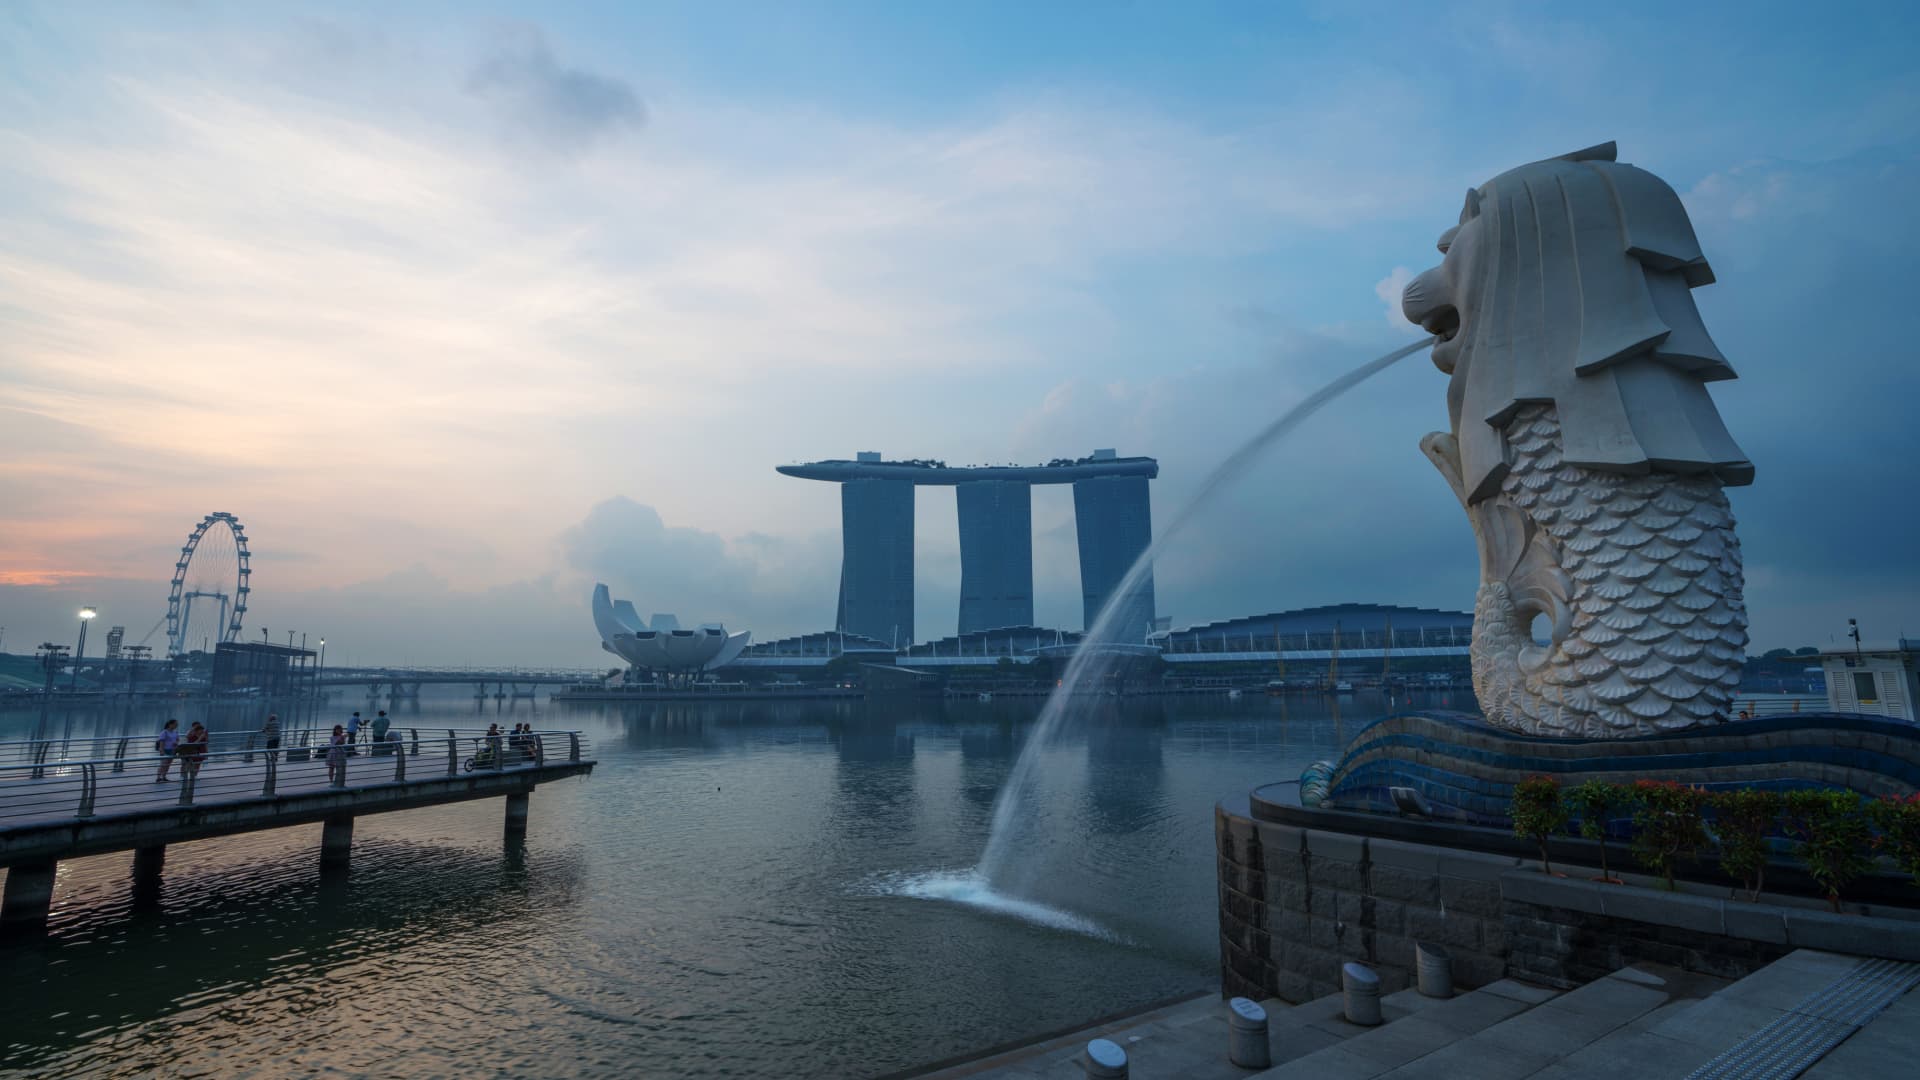 Singapore is not looking to regulate A.I. just yet, says the city-state's authority